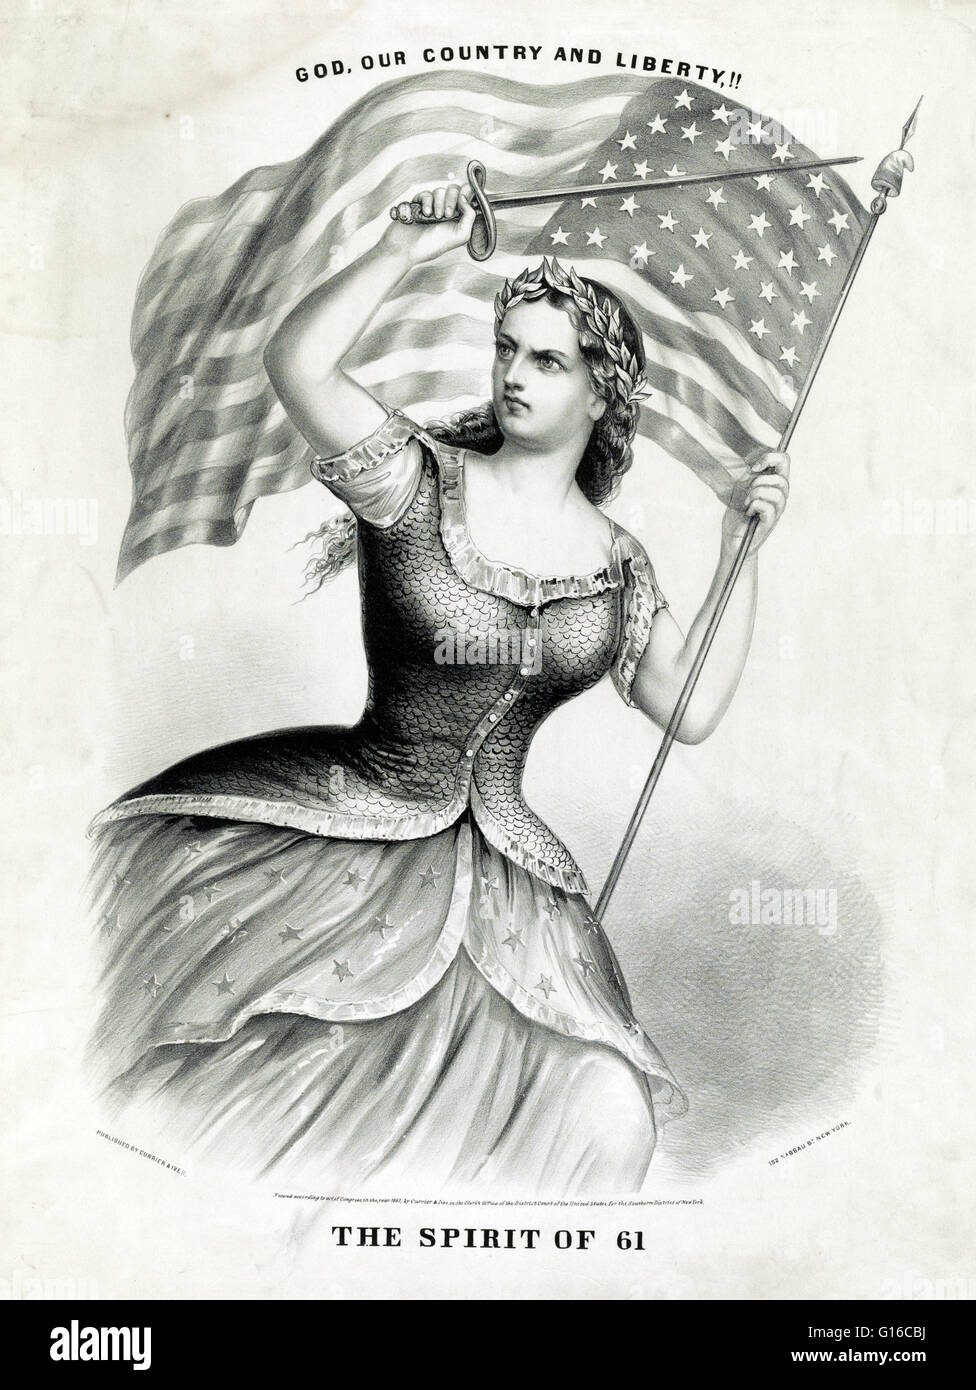 An 1861 Currier & Ives lithograph showing Columbia, armed with a sword and grasping an American flag, advances toward the left. She strikes an aggressive pose and has a stern, almost fierce demeanor. The motto 'GOD, OUR COUNTRY AND LIBERTY,!!' appears abo Stock Photo